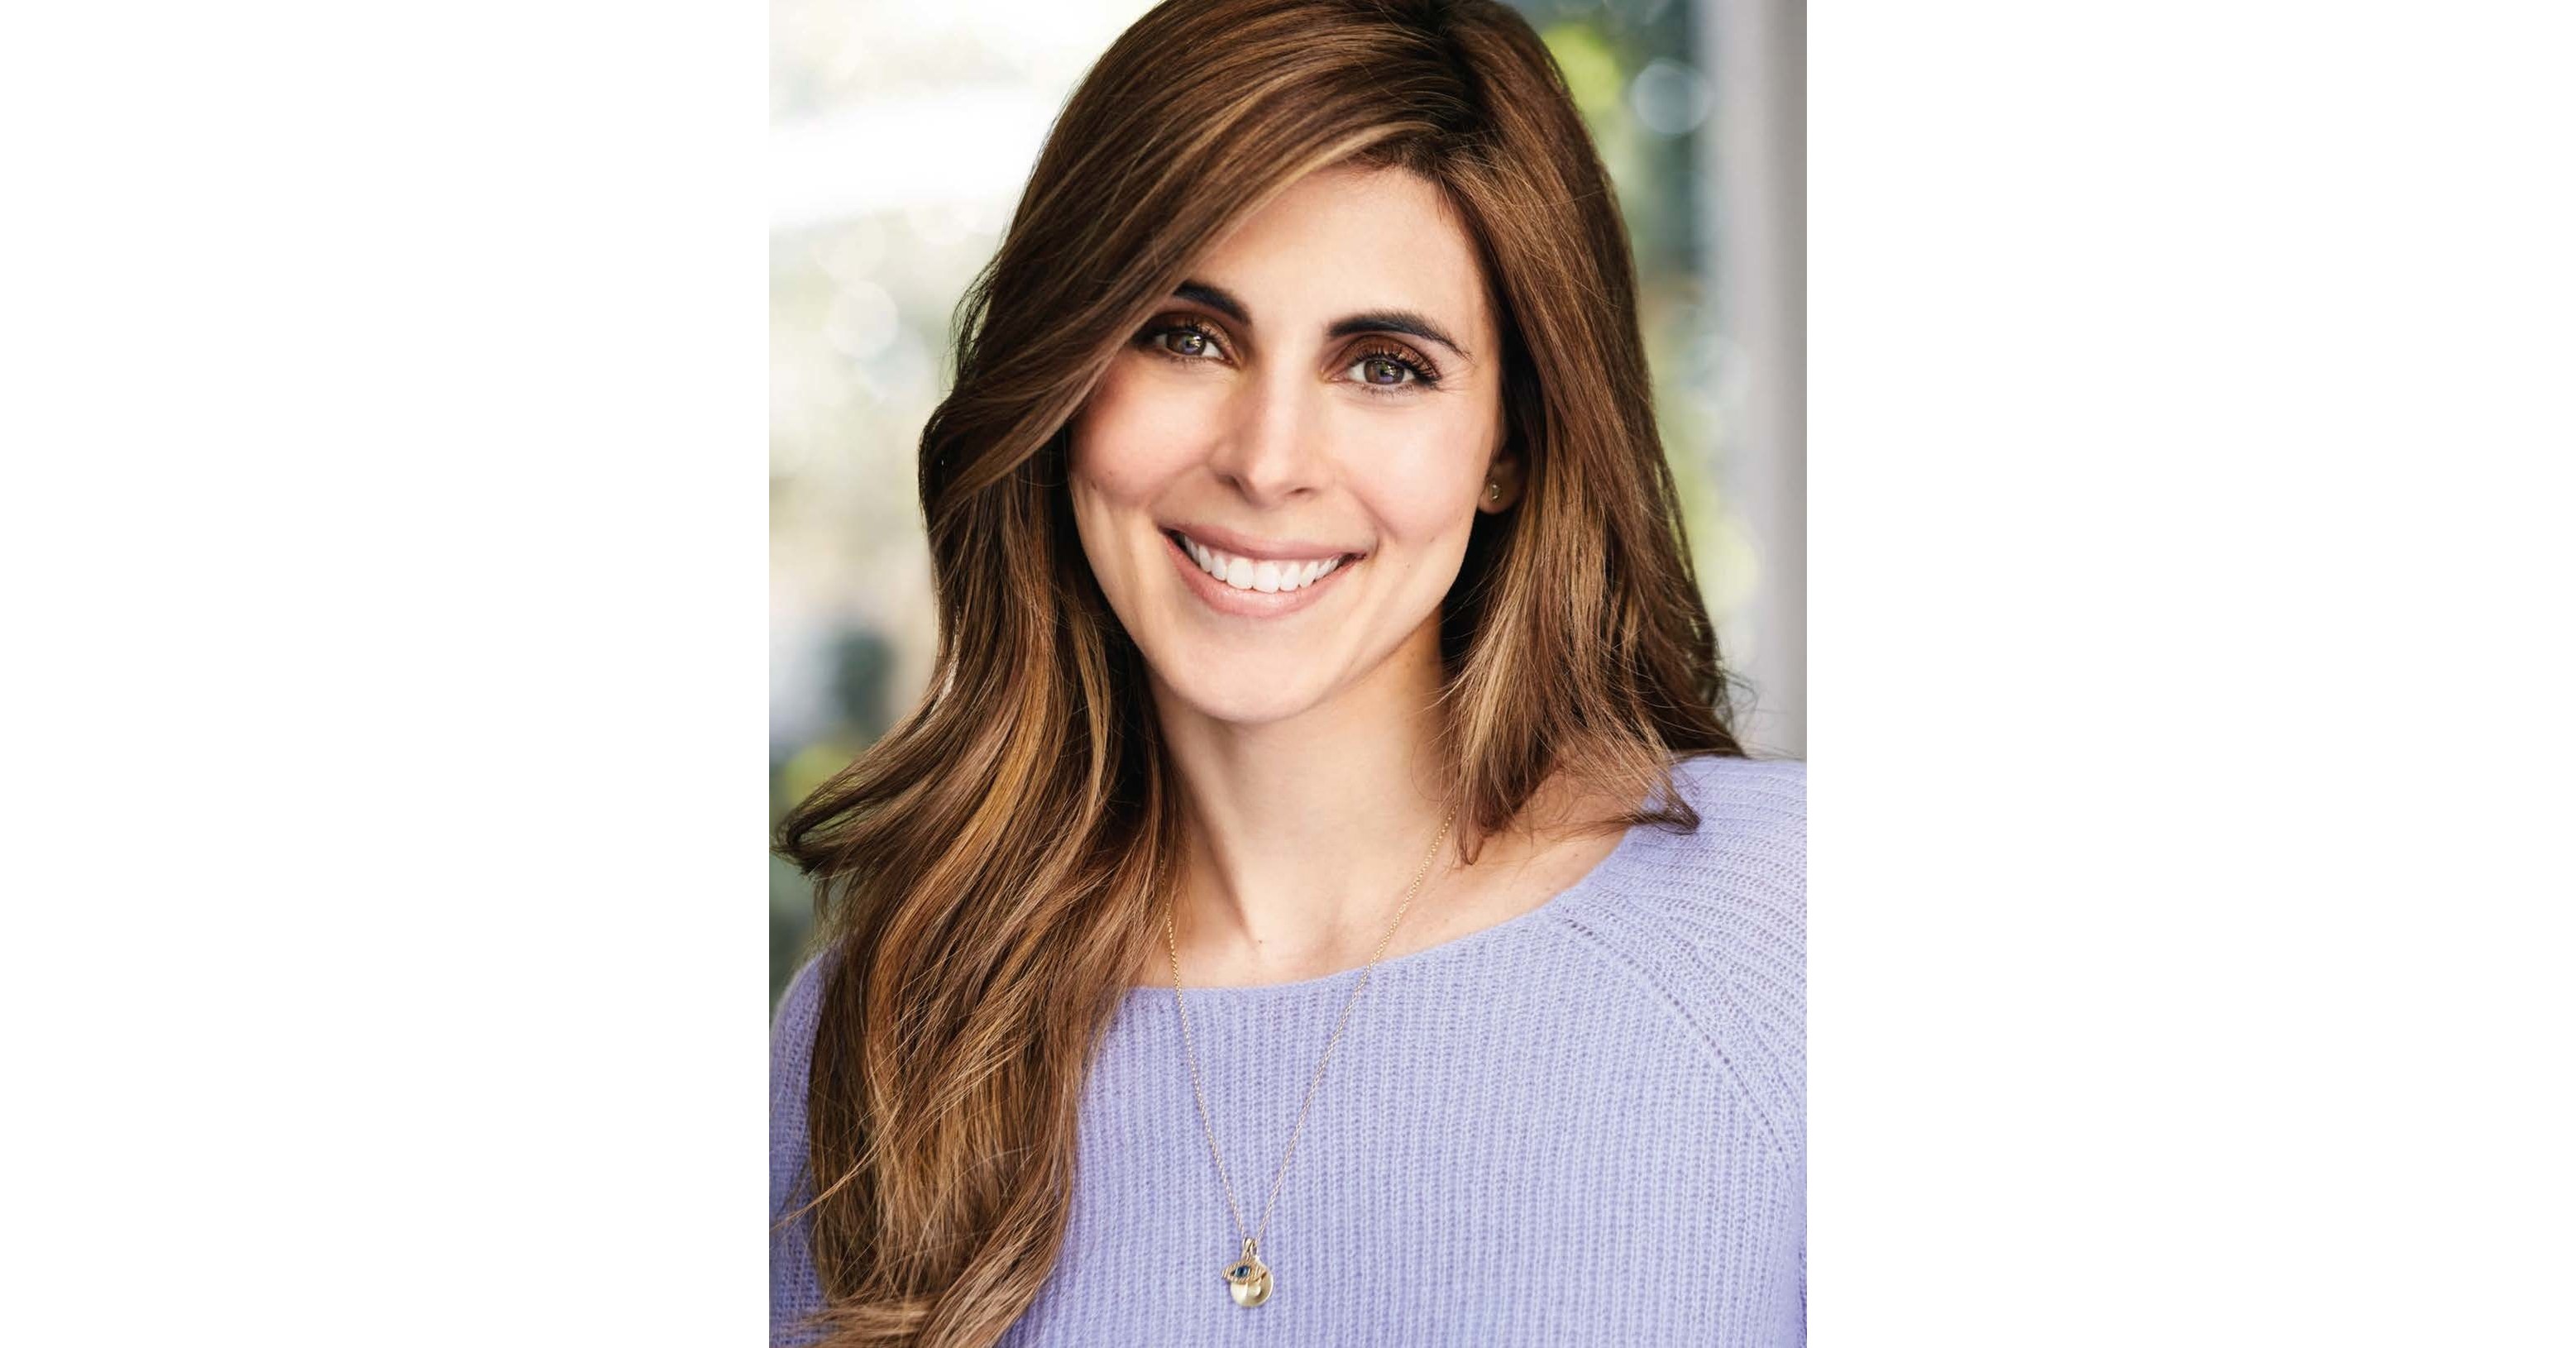 Cue Health Partners with Actress Jamie-Lynn Sigler to Raise Awareness of At-Home, Same-Day Test-to-Treatment Platform for COVID-19 and Beyond